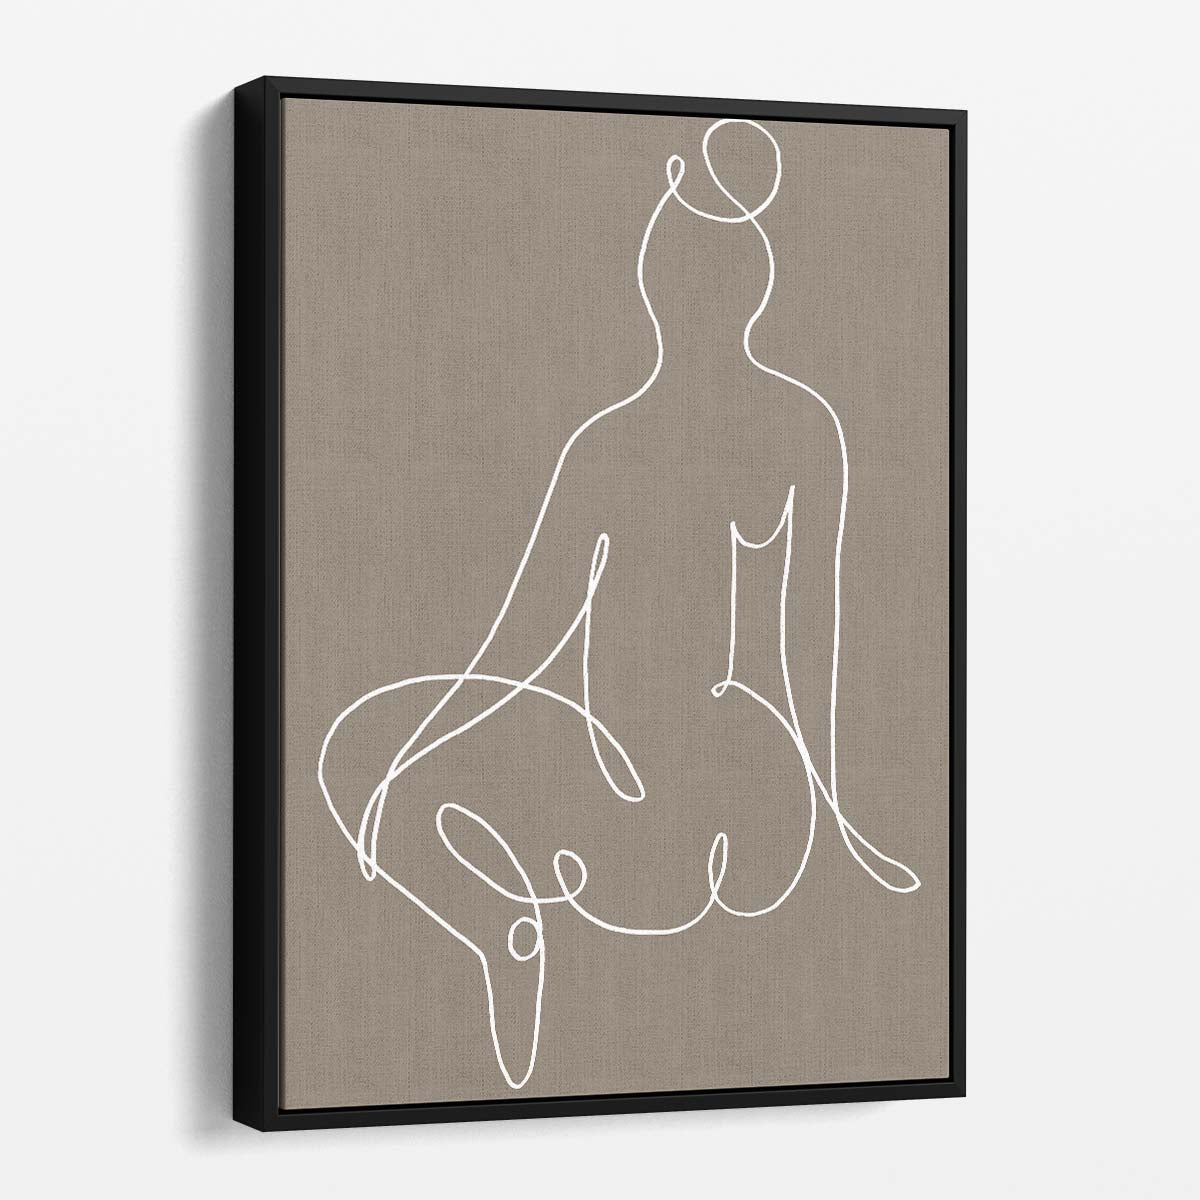 Minimalist Beige Line Art Illustration of Abstract Female Portrait by Luxuriance Designs, made in USA